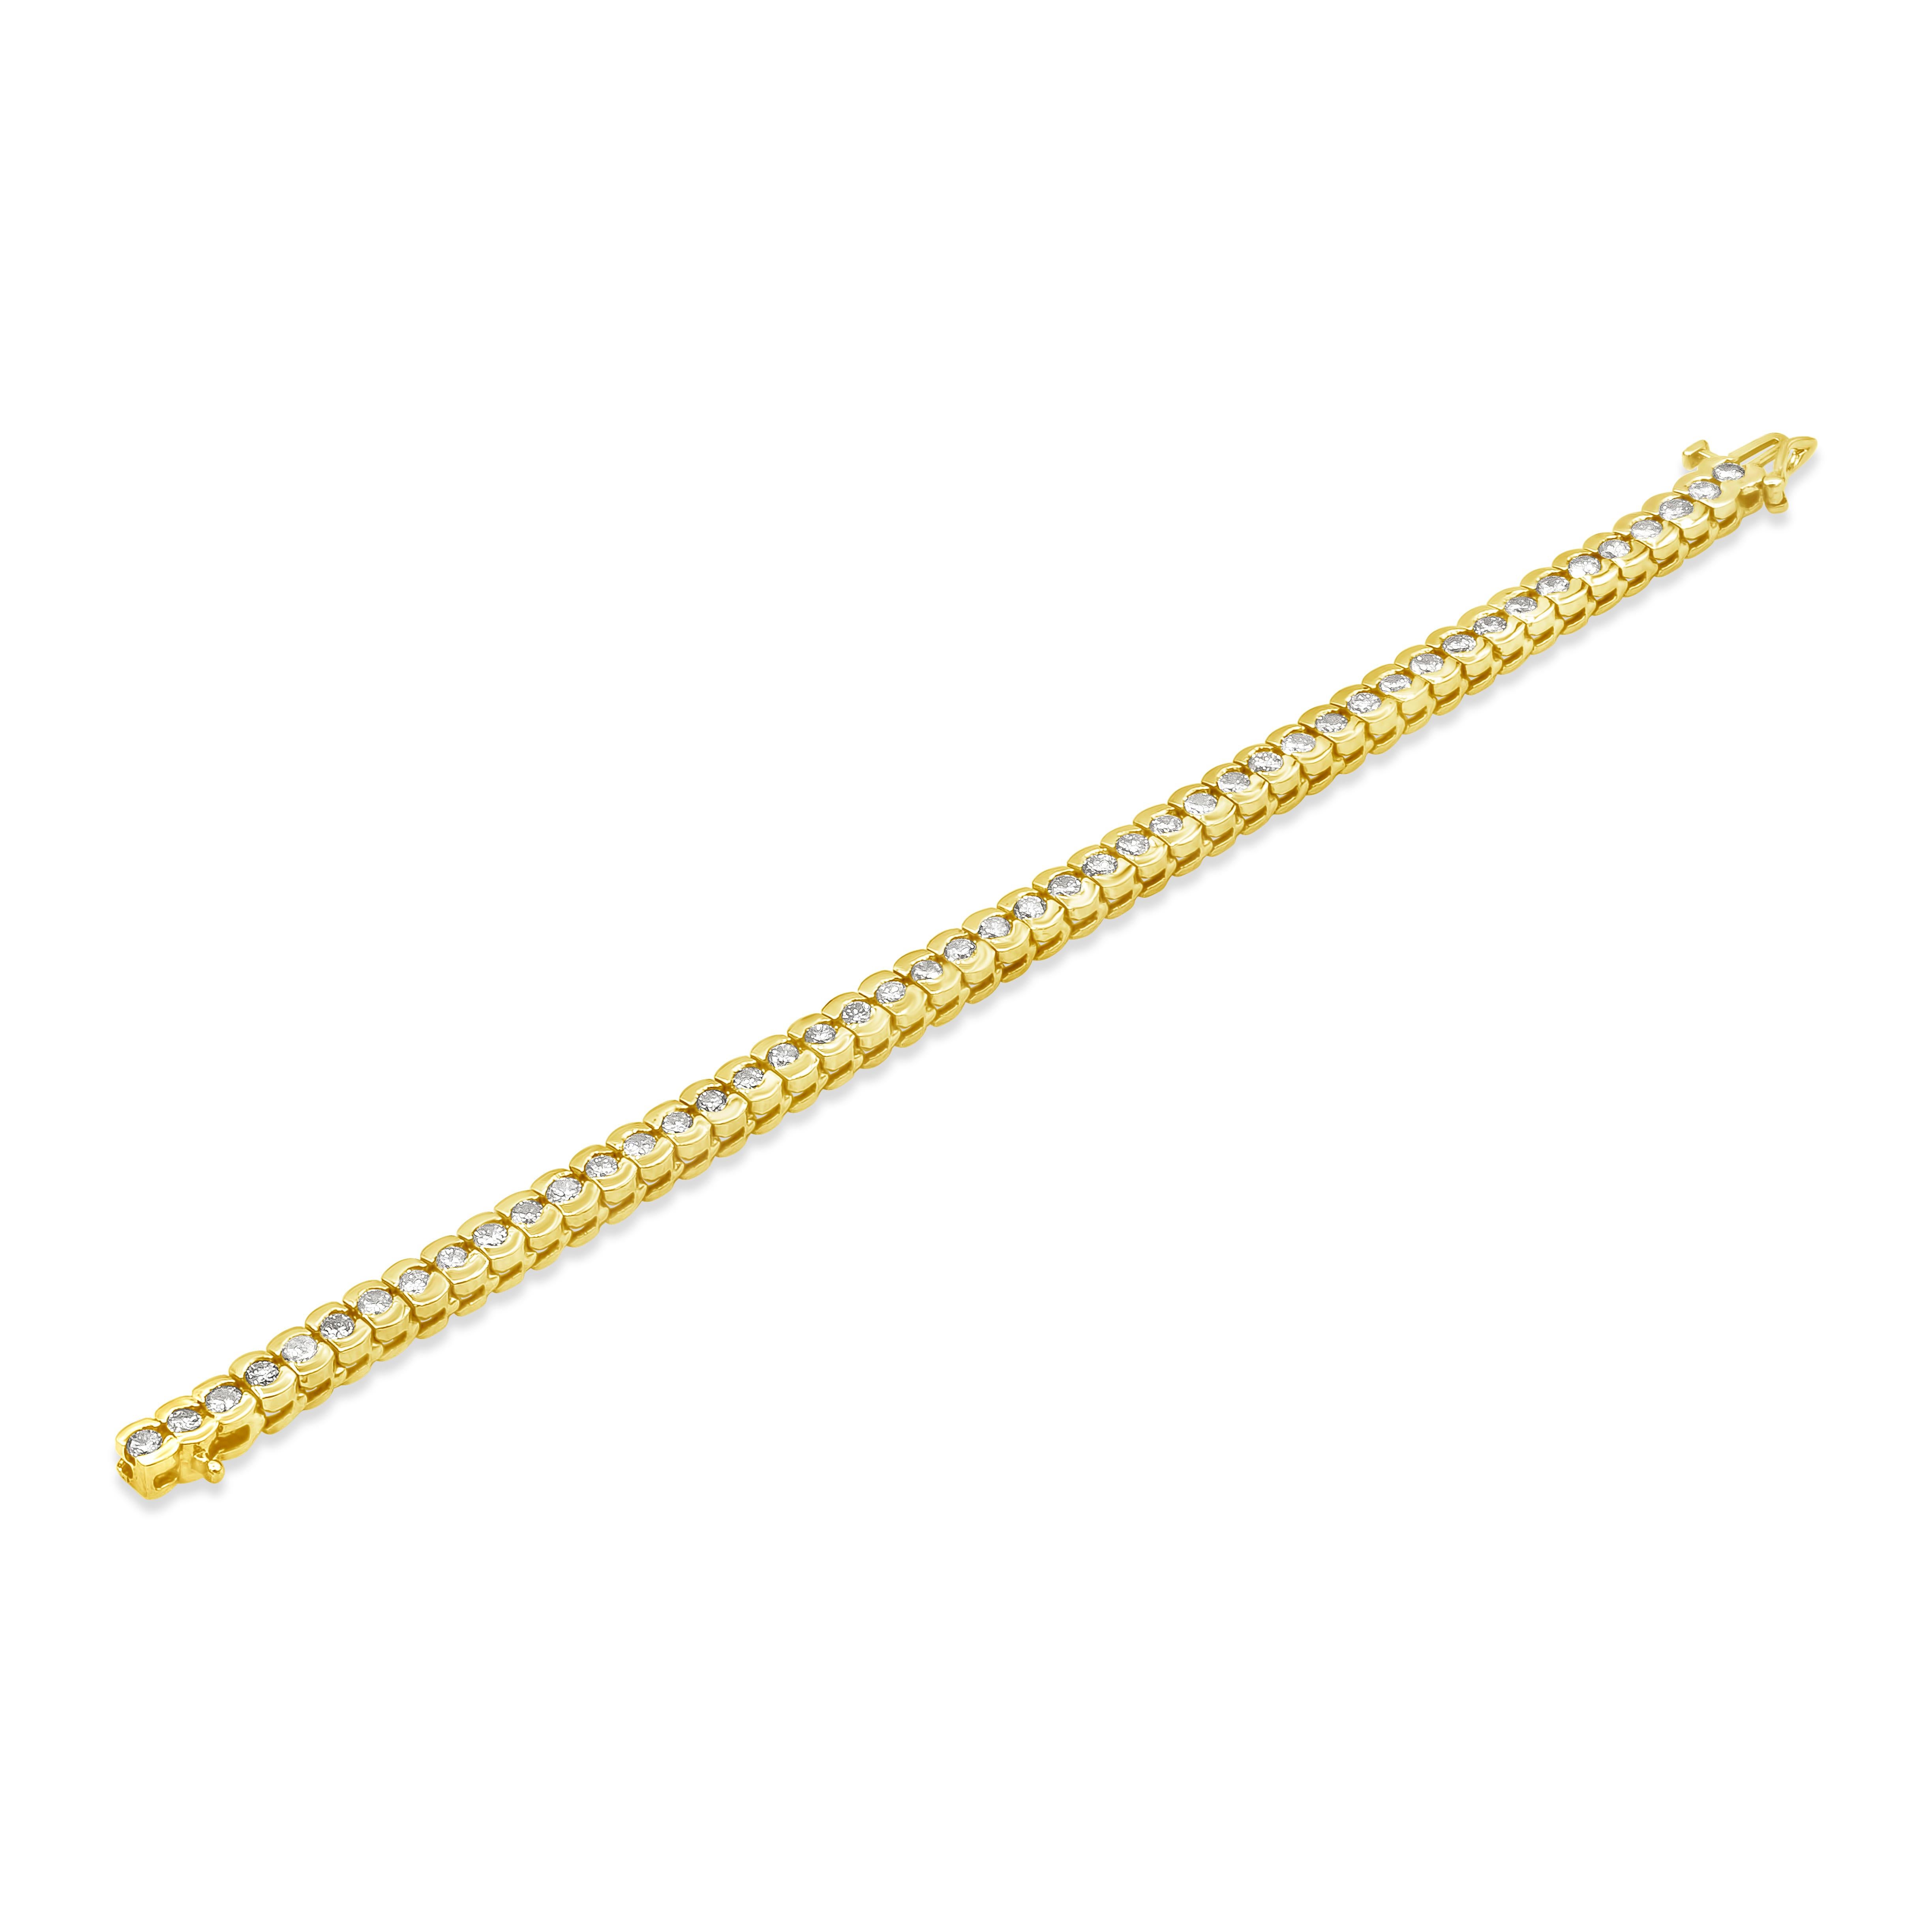 This beautiful tennis bracelet showcases 6.00 carats total brilliant round diamonds mounted in half bezel setting. Made in 14K Yellow Gold and 7 inches in Length.

Roman Malakov is a custom house, specializing in creating anything you can imagine.